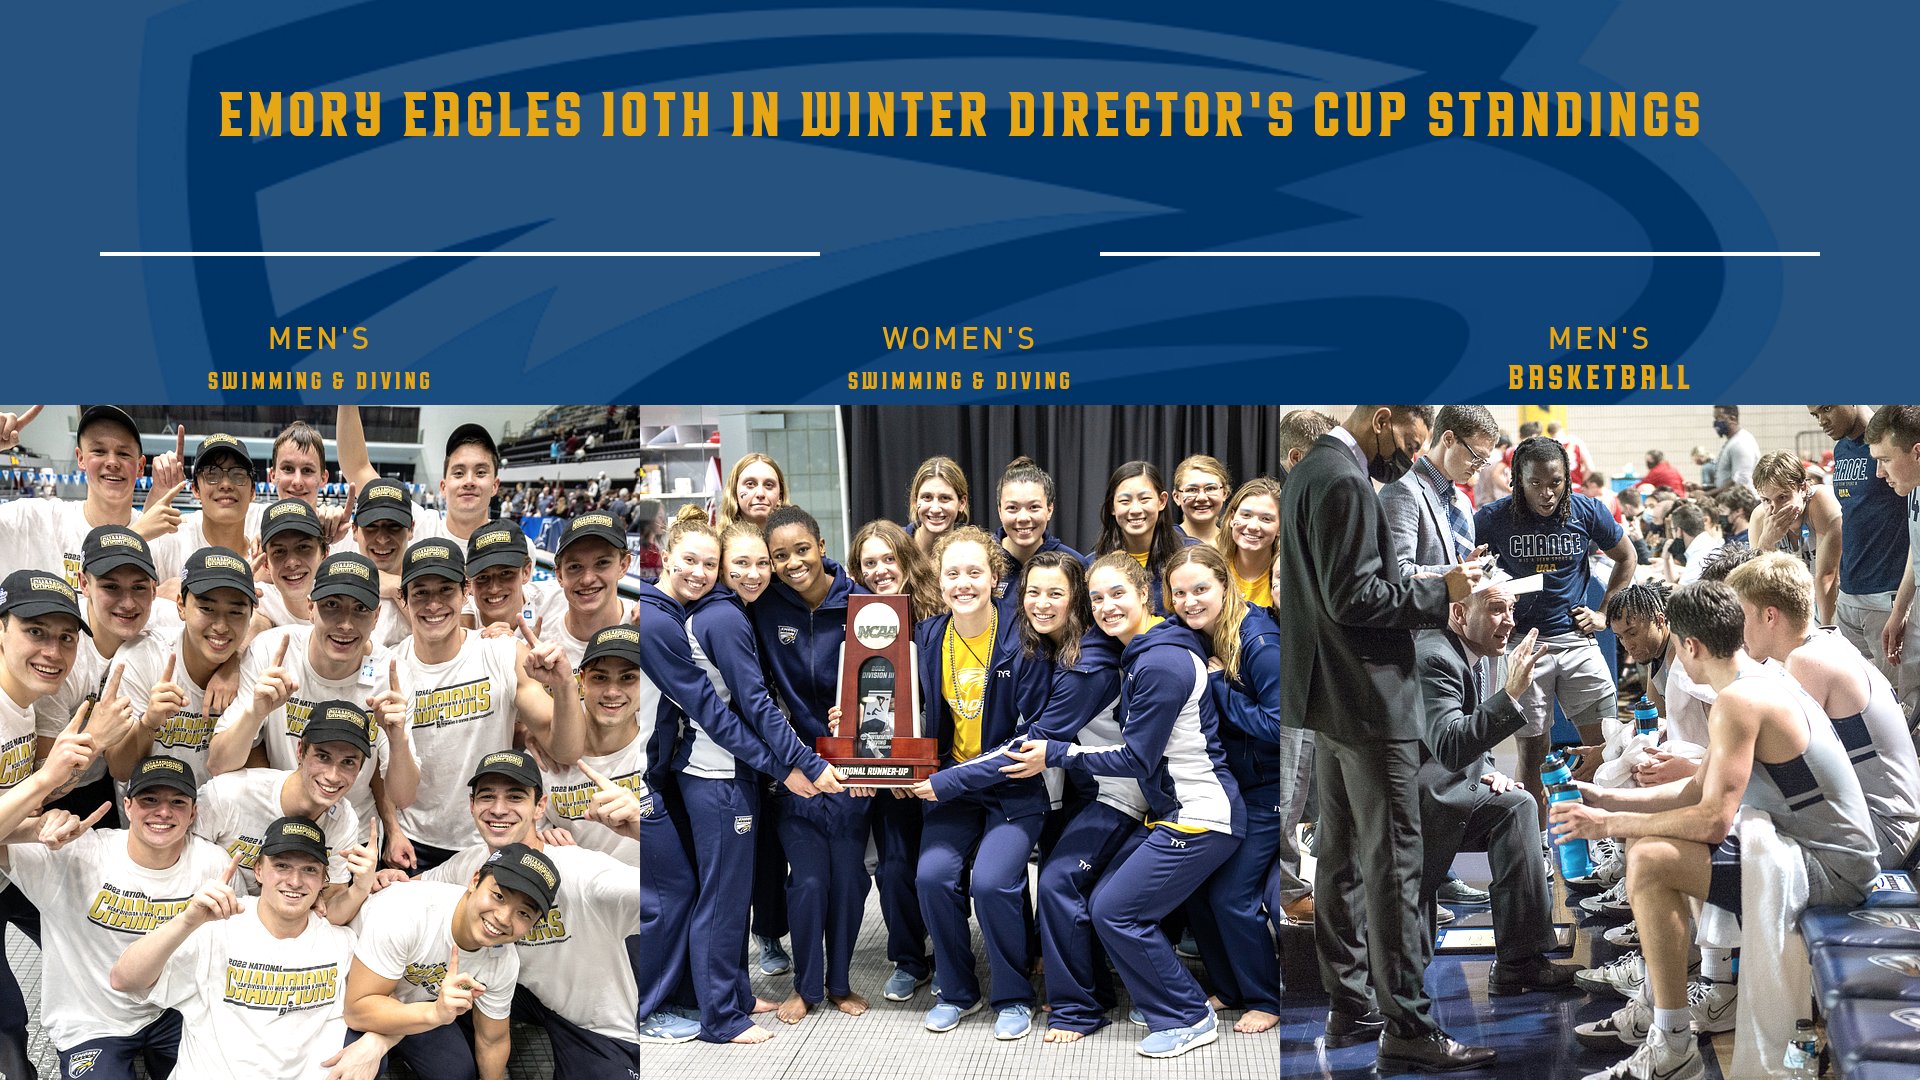 Eagles Stand 10th in Director's Cup Standings Following Winter Season